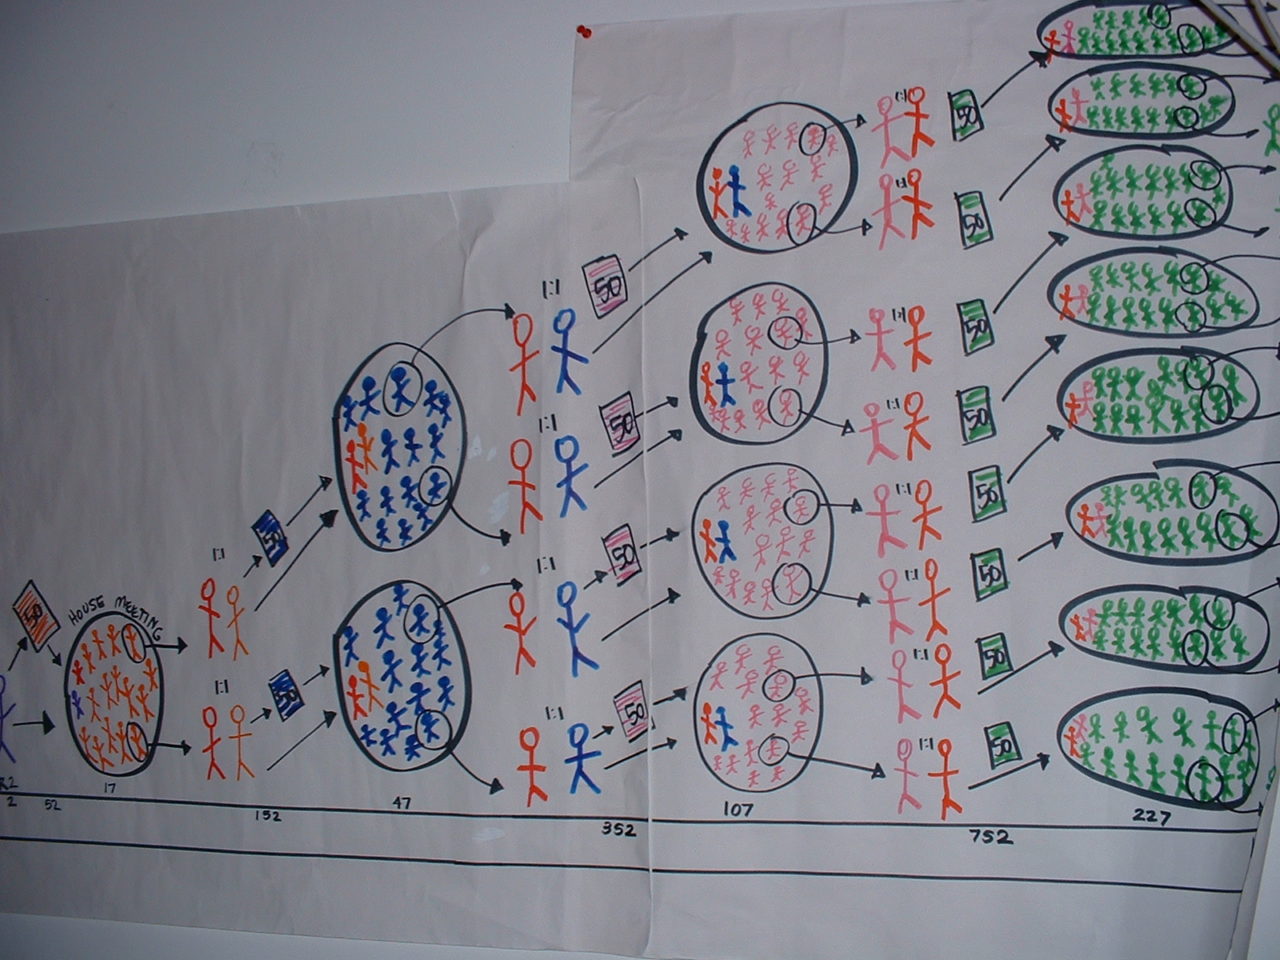 Photo of a diagram of how grassroots organizing works drawn on large easel-size post-it notes at Howard Dean for President’s New Hampshire HQ in Manchester, January 24, 2004